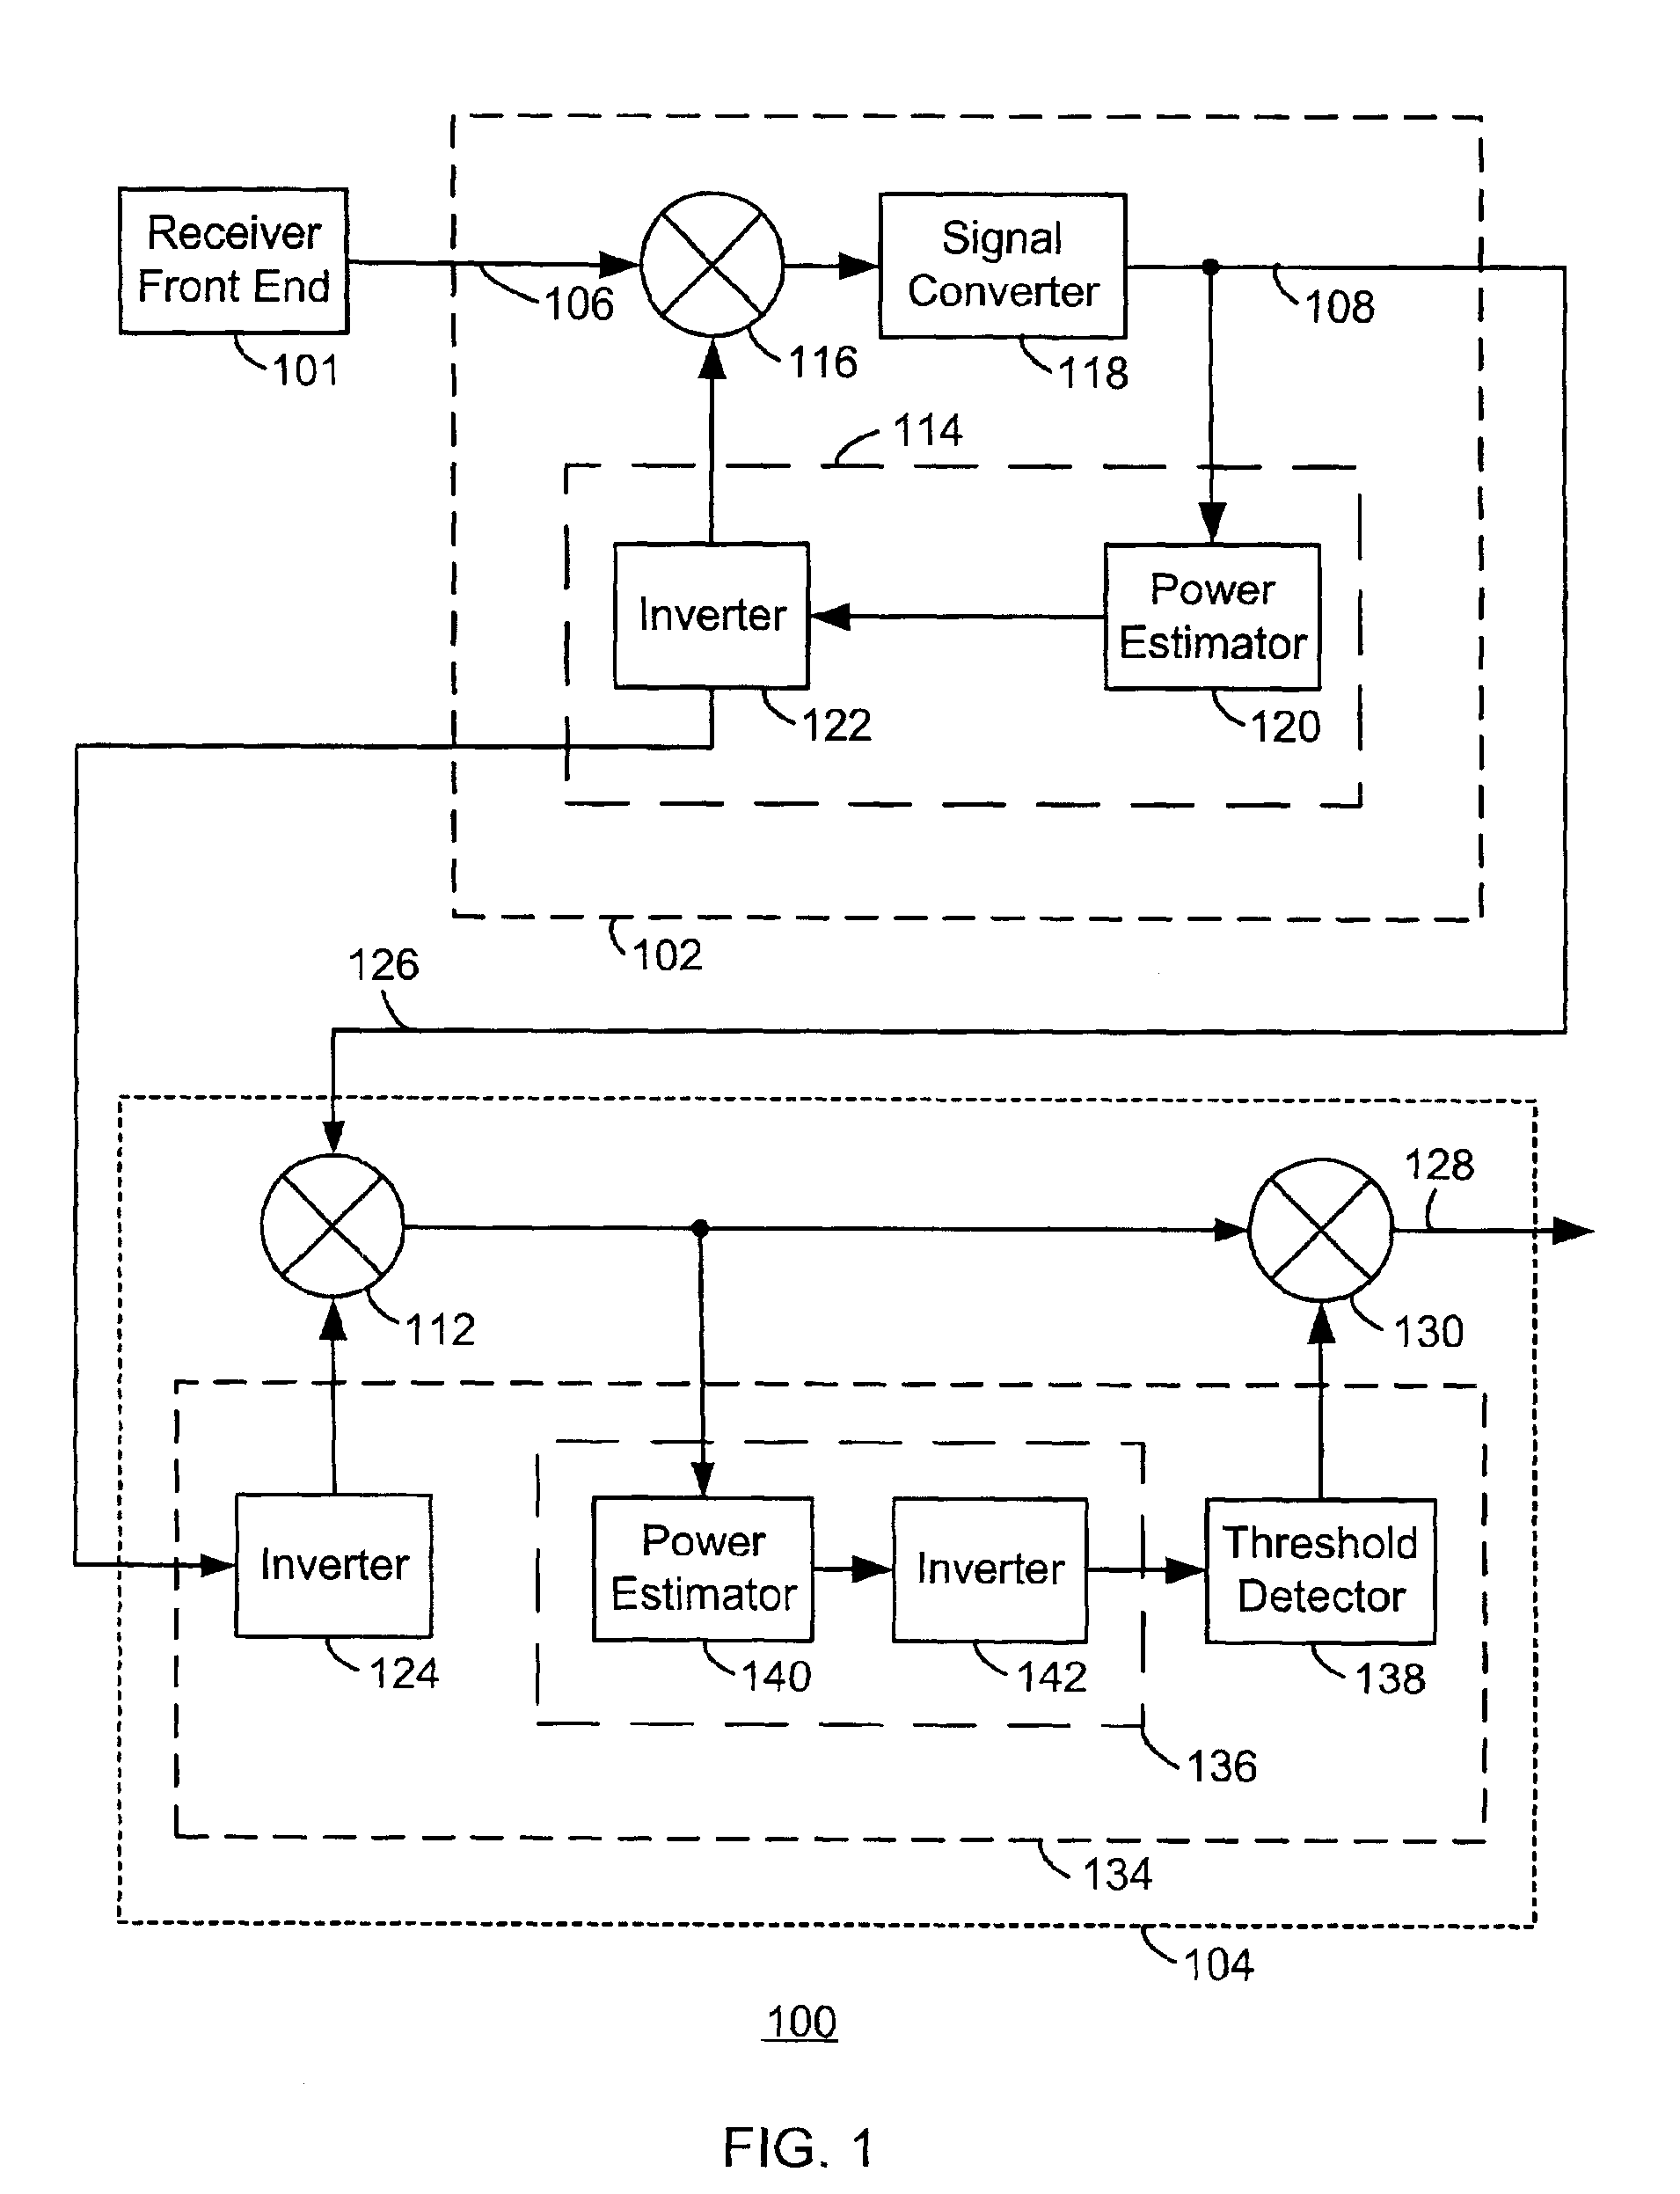 System and method for inverting automatic gain control (AGC) and soft limiting